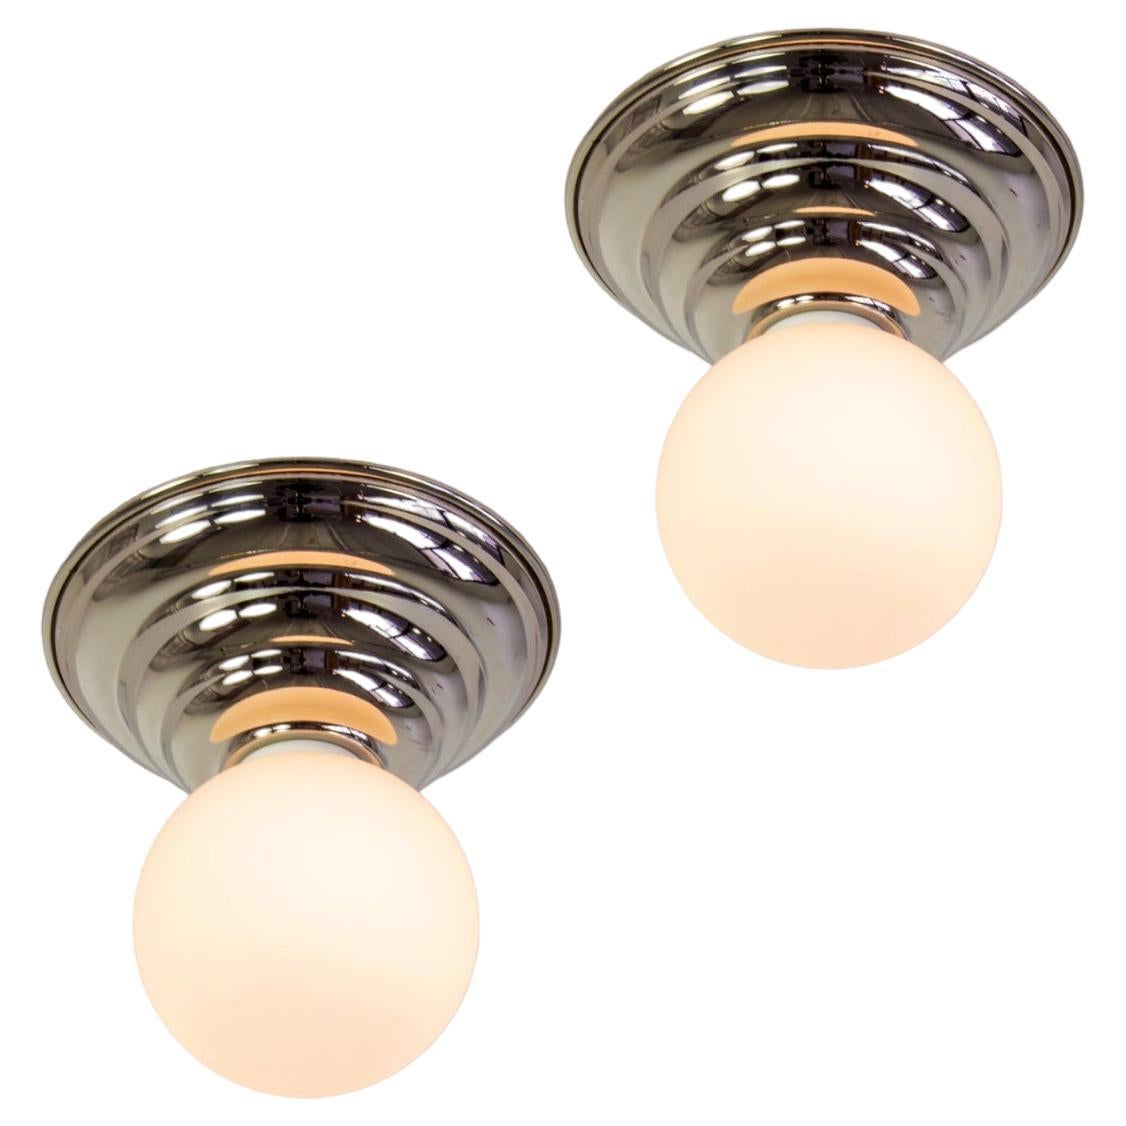 Pair of Hive Flush Mounts by Research.Lighting, Polished Nickel, Made to Order